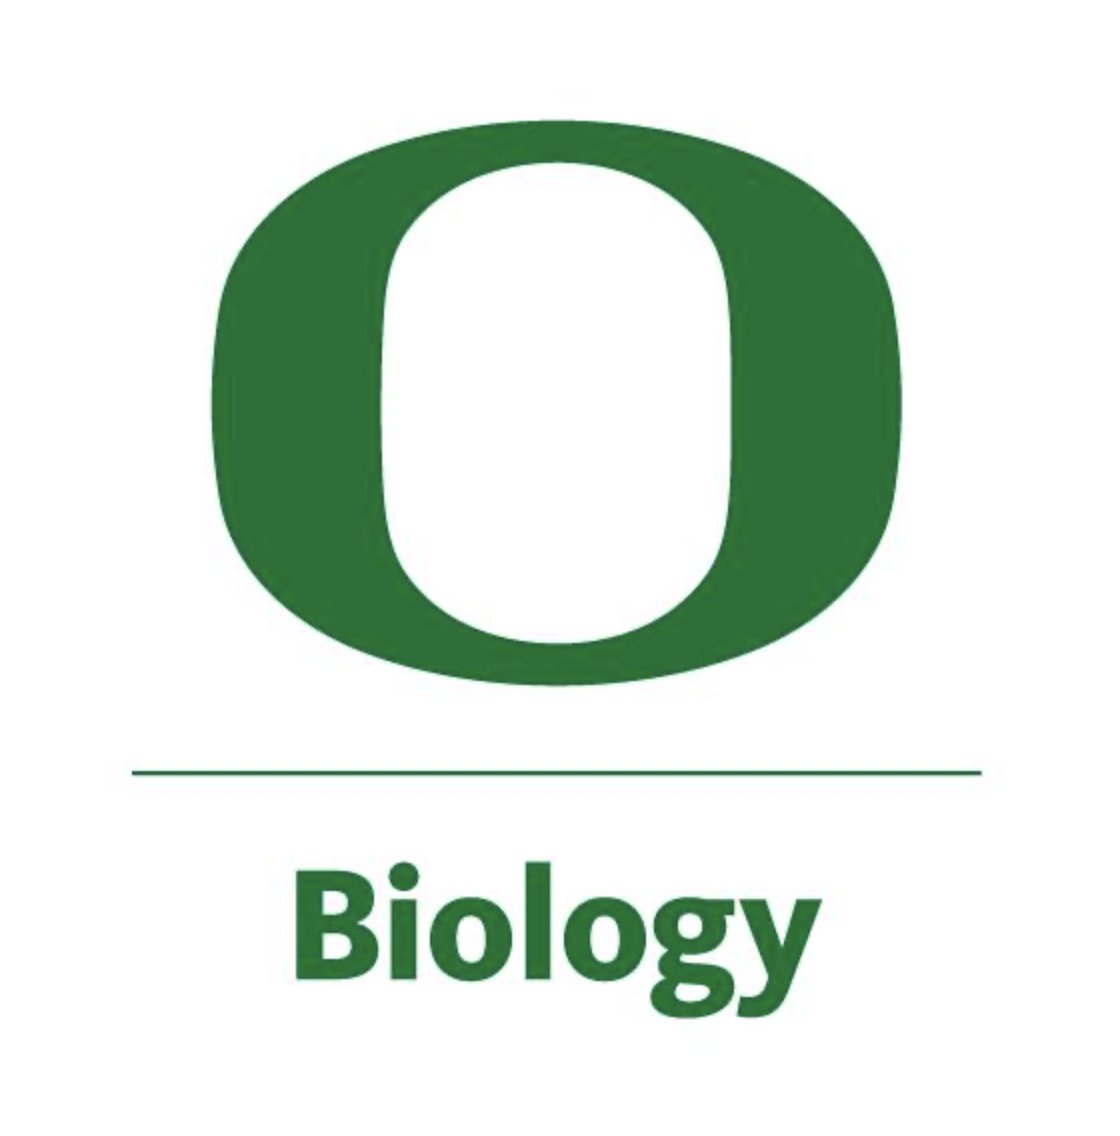 The Biology Department at the University of Oregon (@uoregon) is hiring a new department head. Apply by Feb 12th if interested, and please share with others who might be. Reposts appreciated.